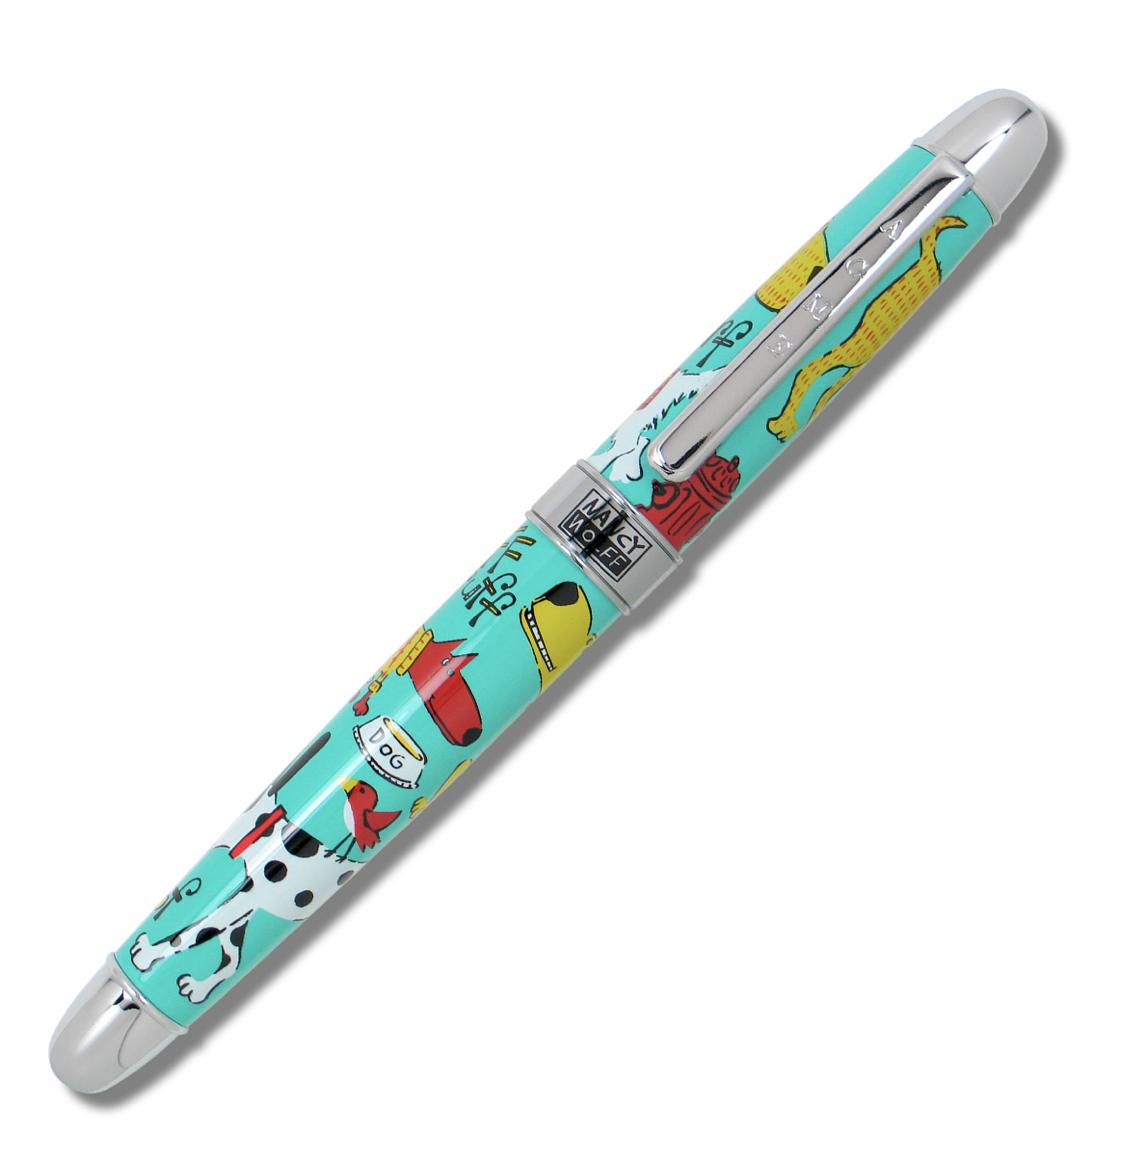 Archived ACME Studio "Dogs" Roller Ball Pen by Designer N. WOLFF - NEW